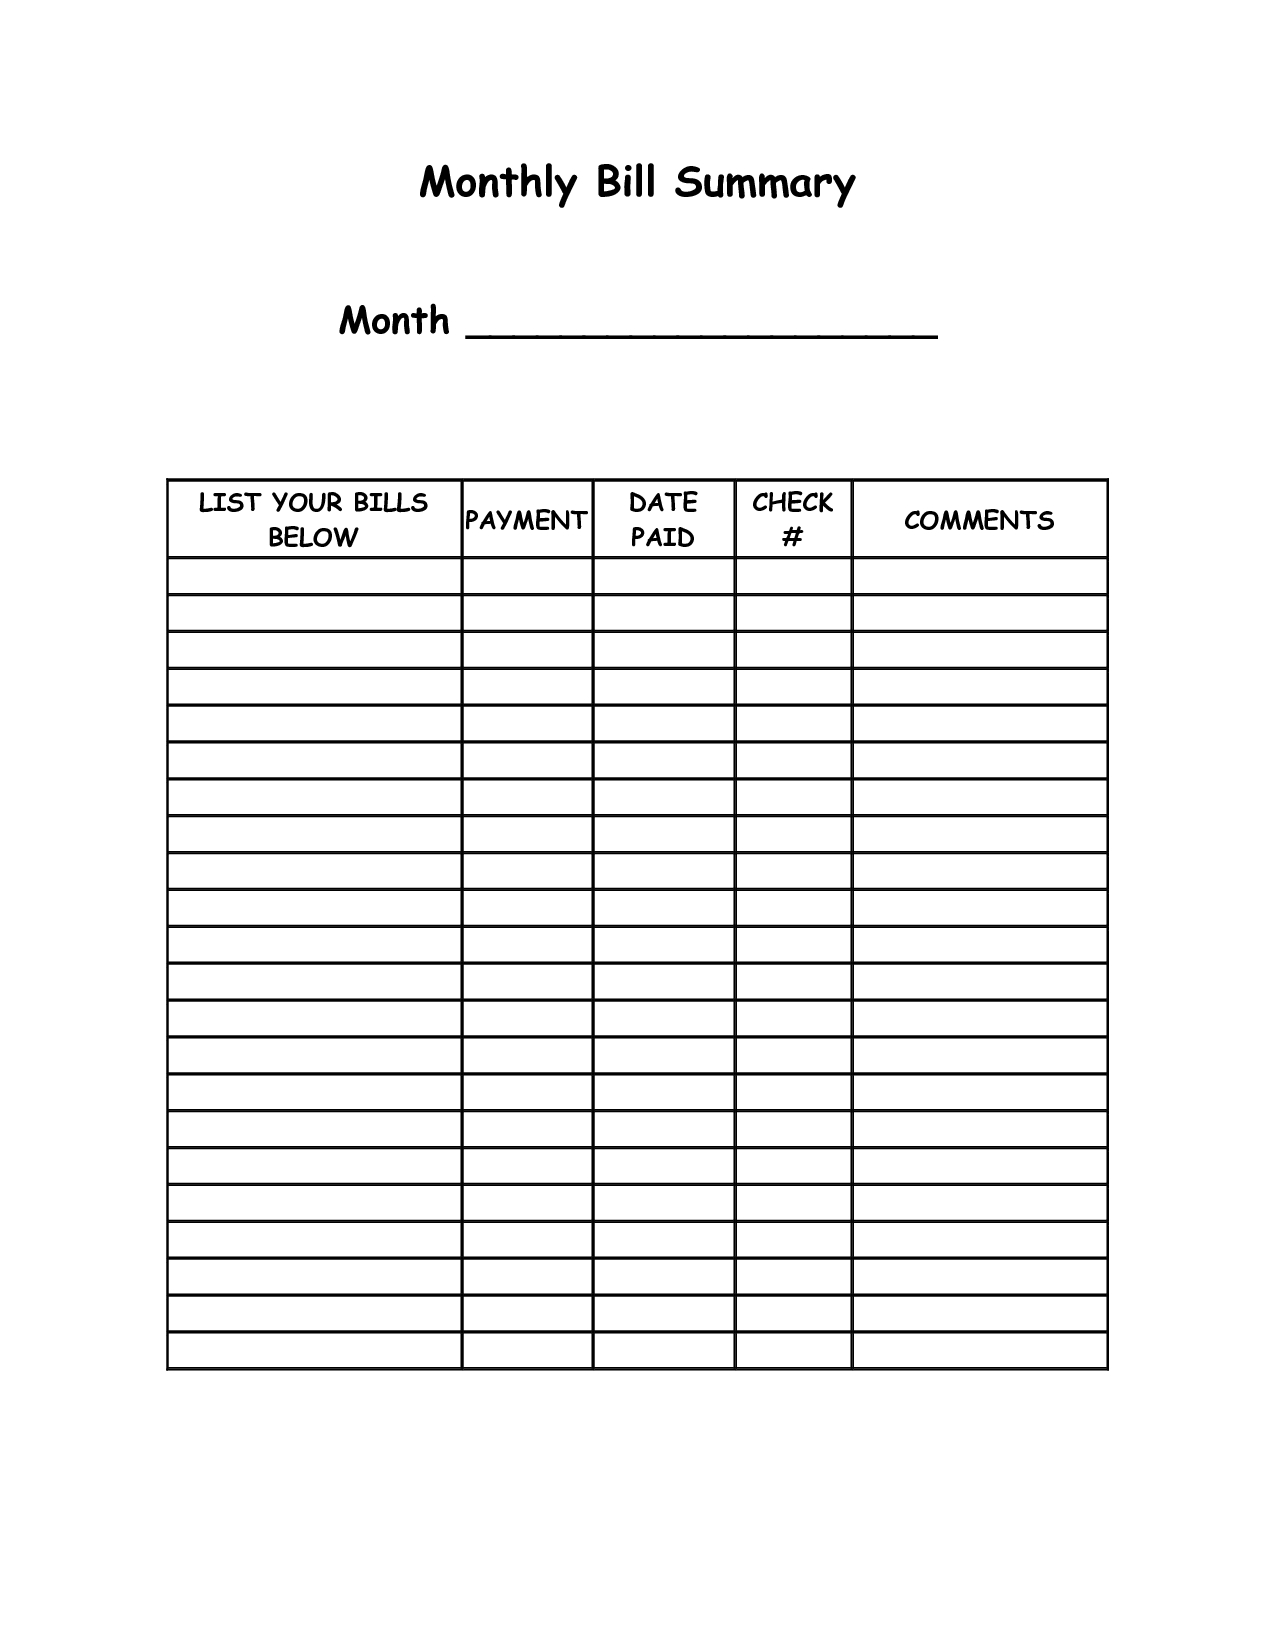 Monthly Bill Summary Doc | Monthly Bill, Organizing Monthly  Free Printable Bill Payment Sheet